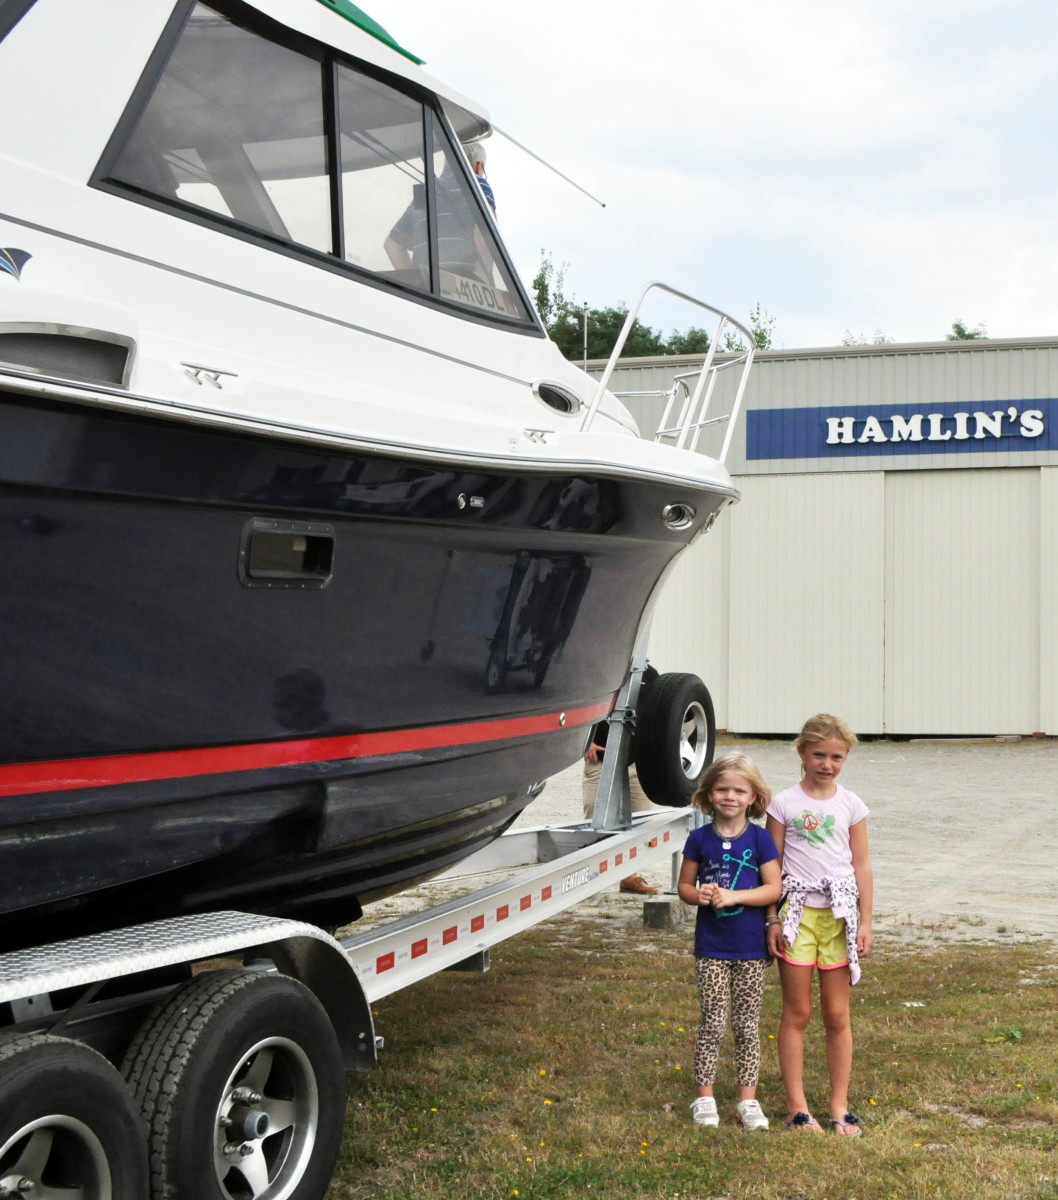  We were greeted at Hamlin’s Marina in Hampden by the Higgins girls, daughters of Dan Higgins, the boss.